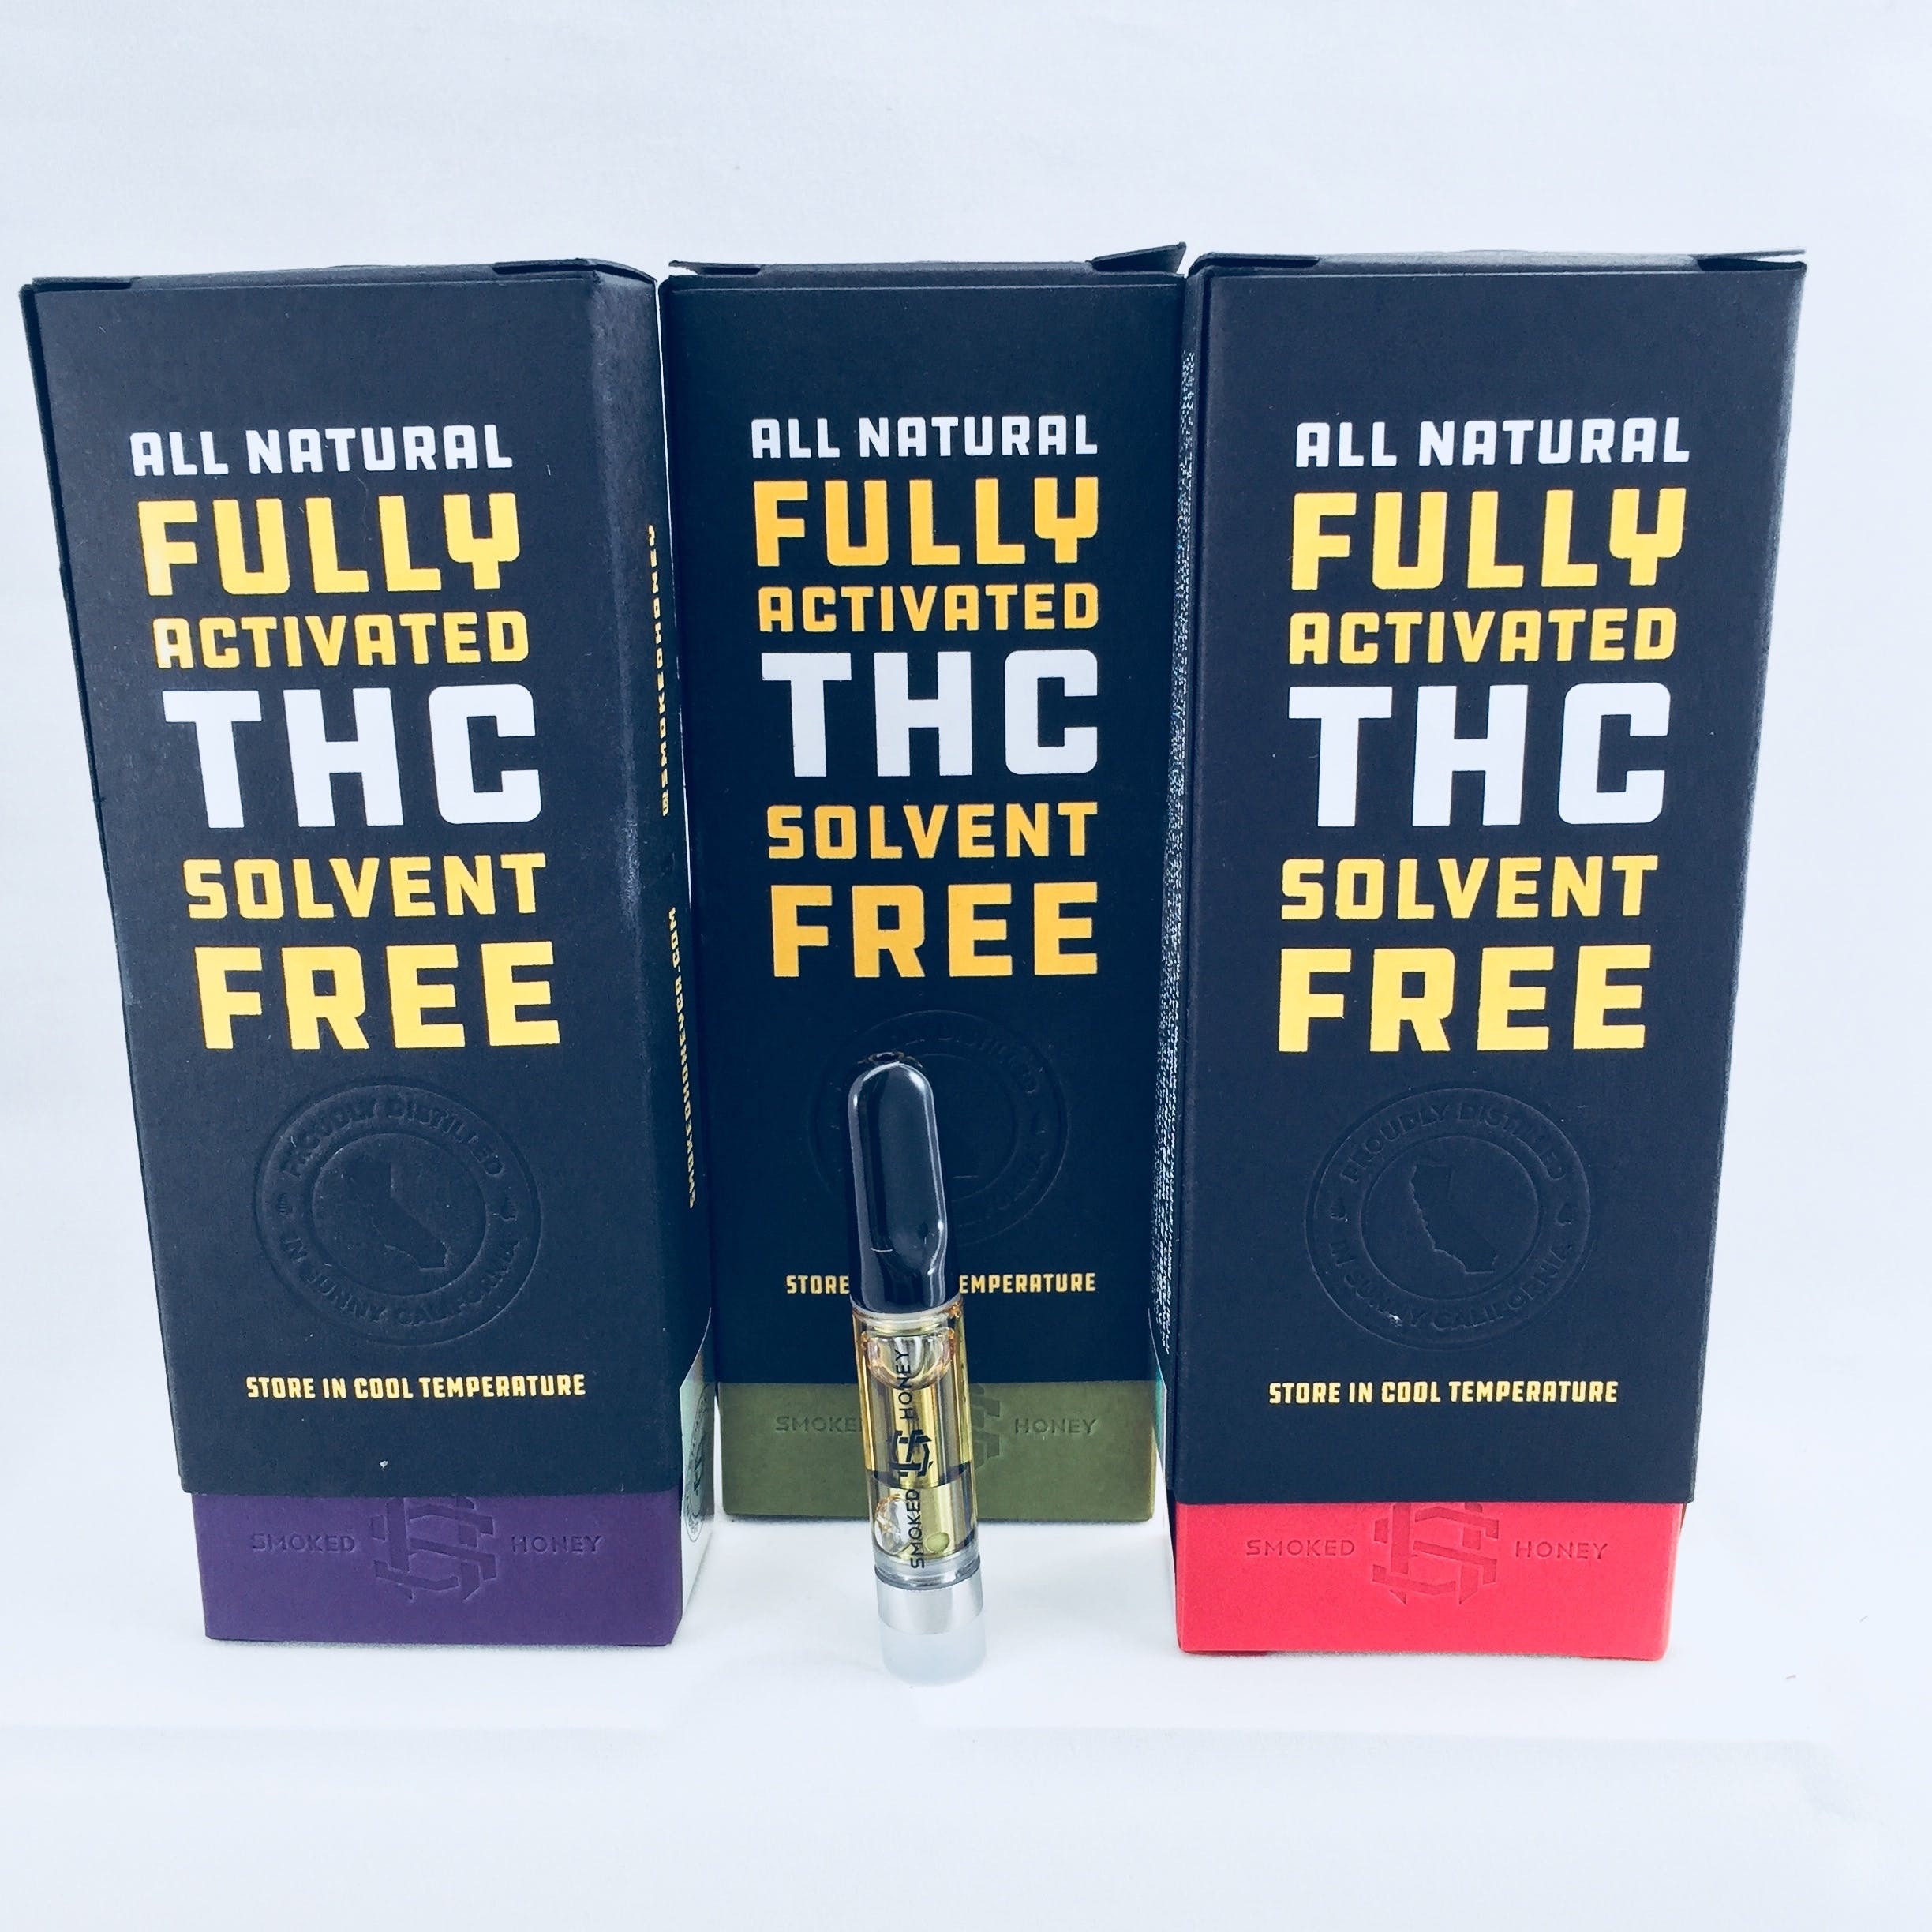 concentrate-smoked-honey-cartridges-sativa